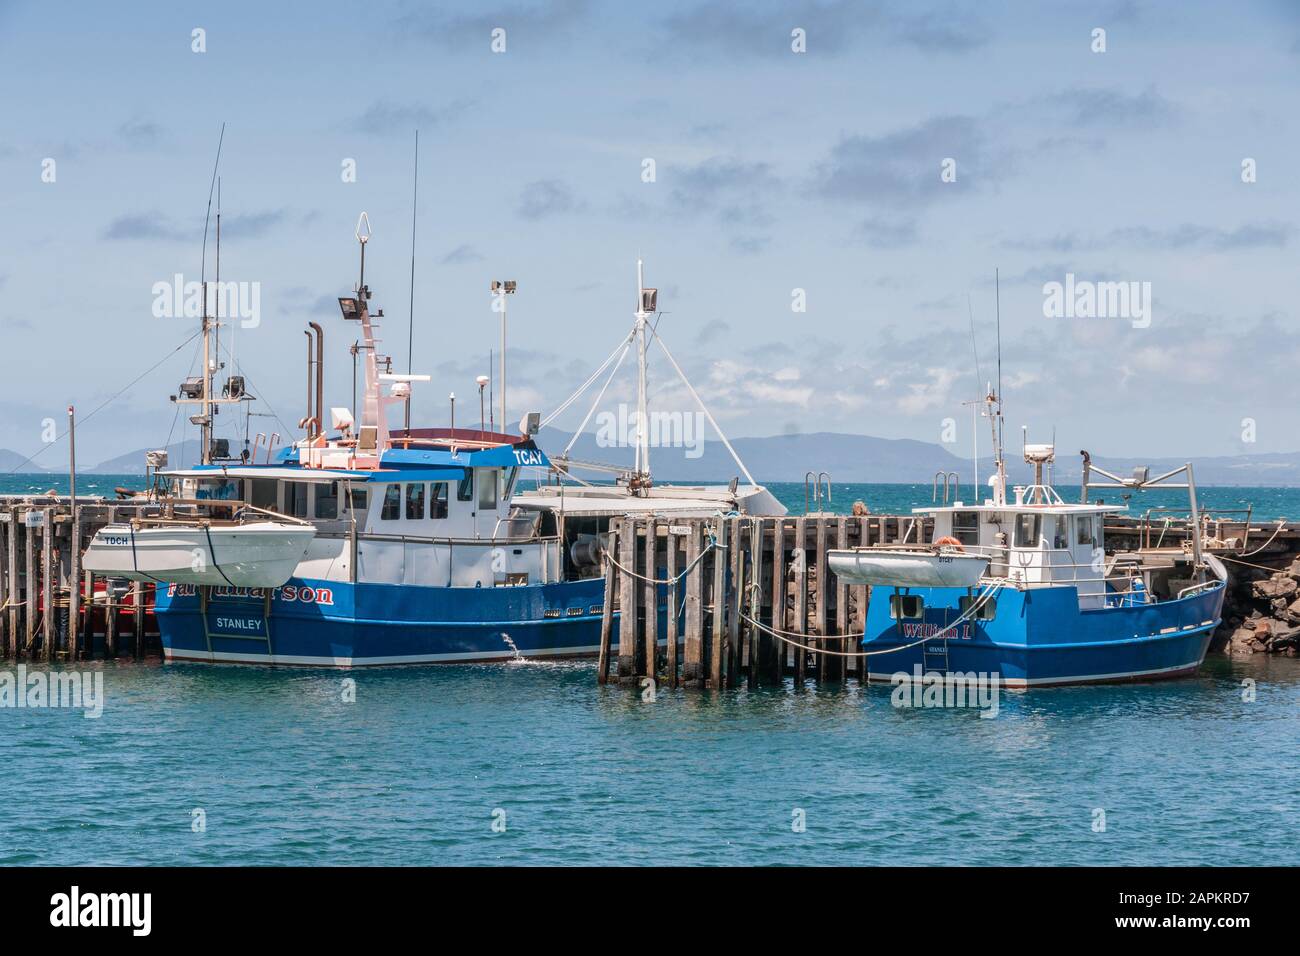 Stanley, Tasmania, Australia - December 15, 2009: Two white and blue fishing vessels docked at wooden pier of the port in azure water and under light Stock Photo